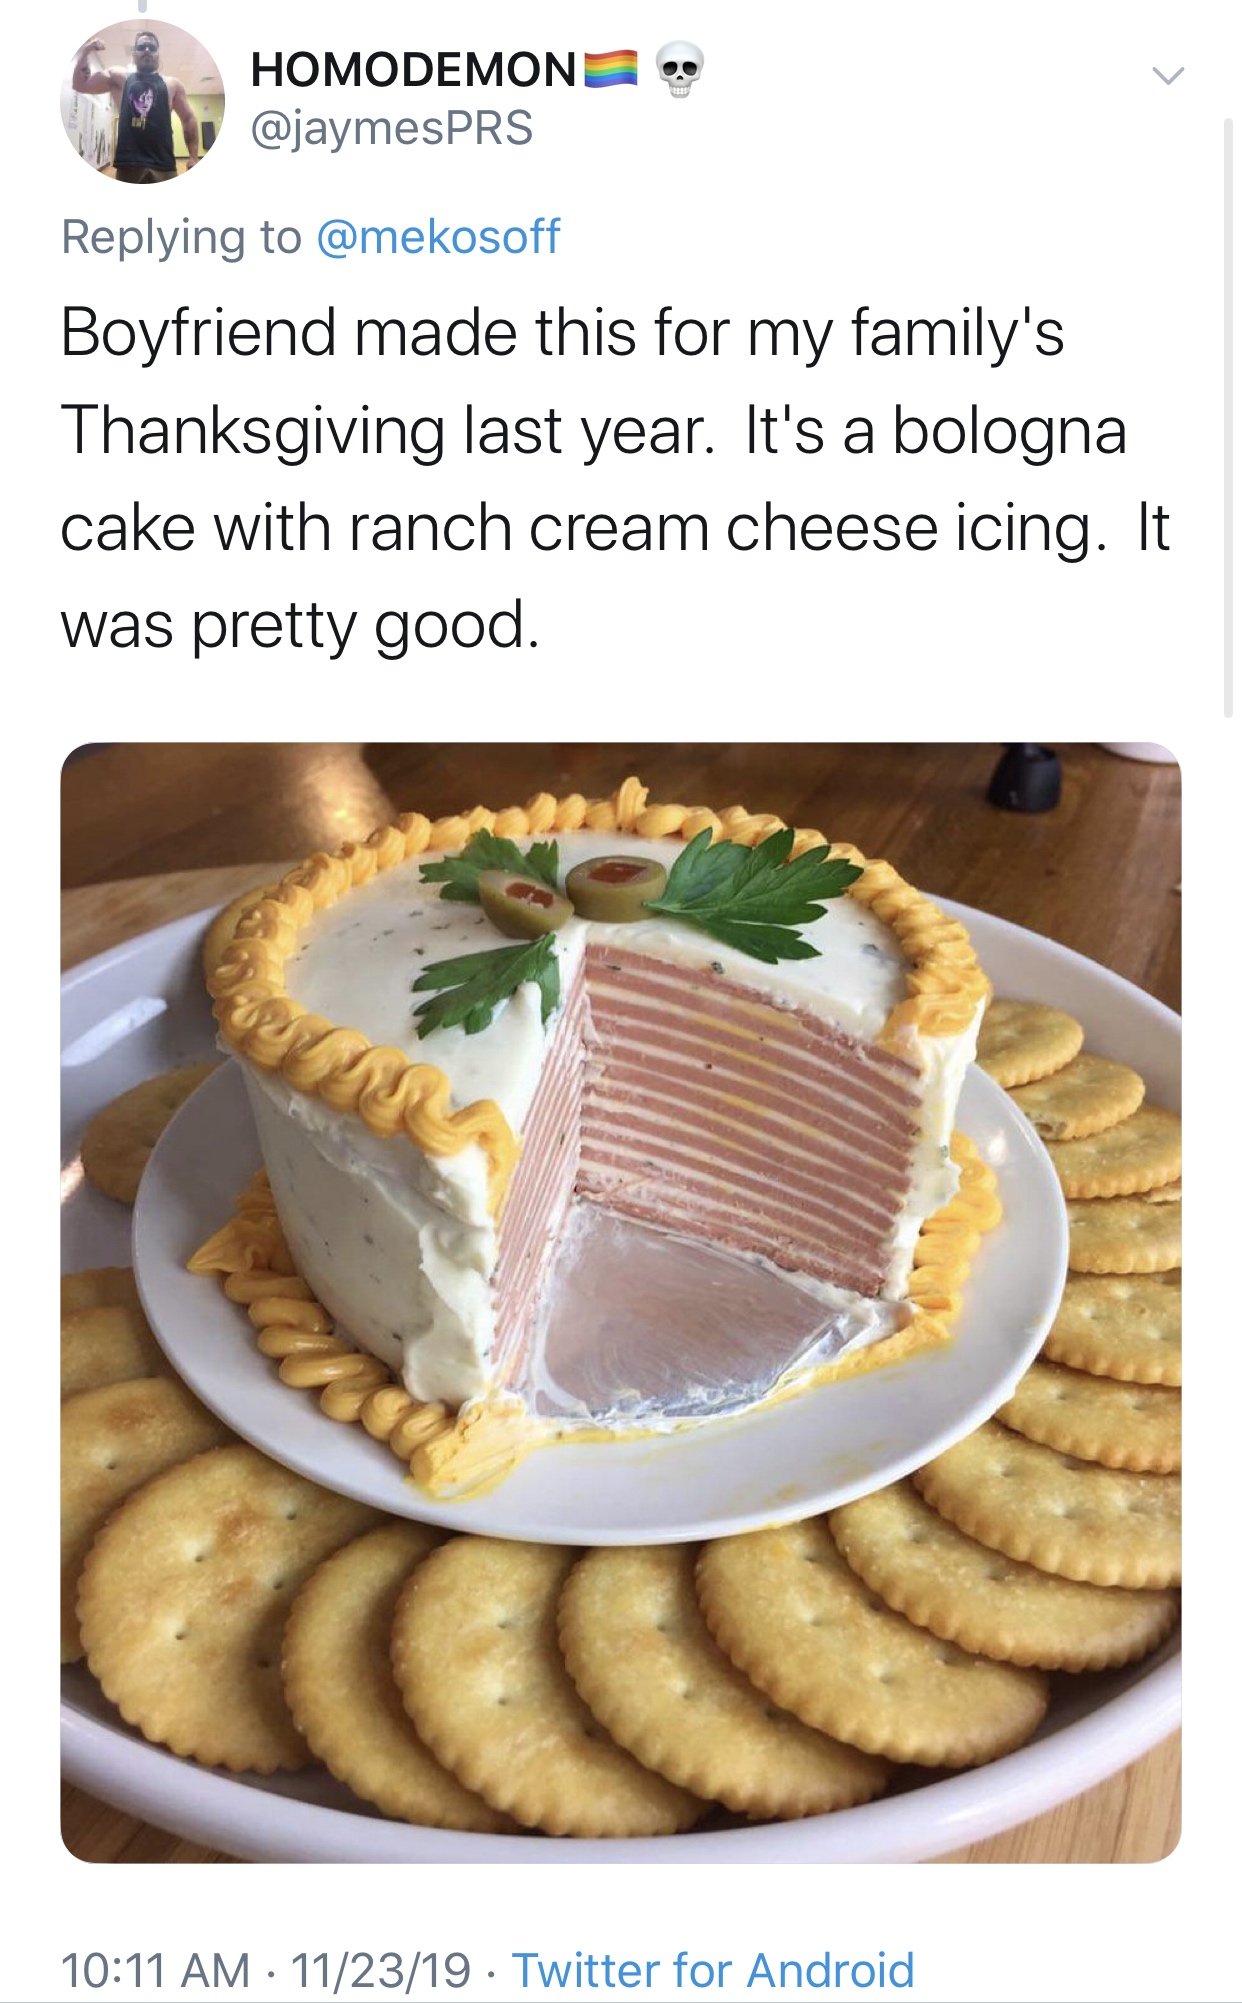 10/10 would bring this to Christmas dinner.